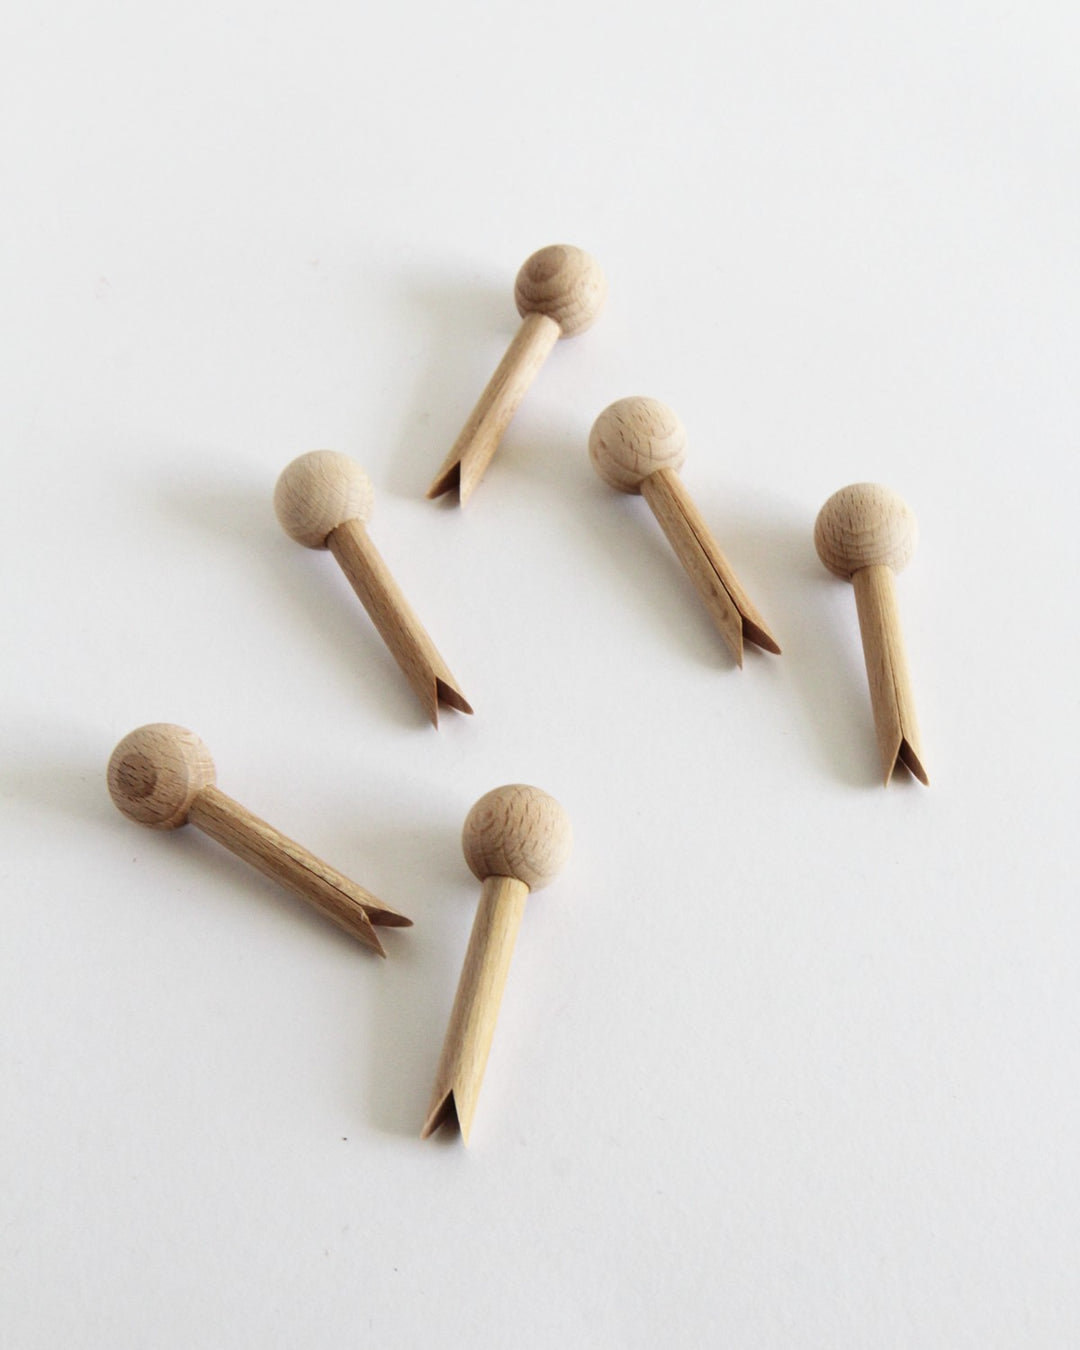 6 Wooden Pegs / Natural